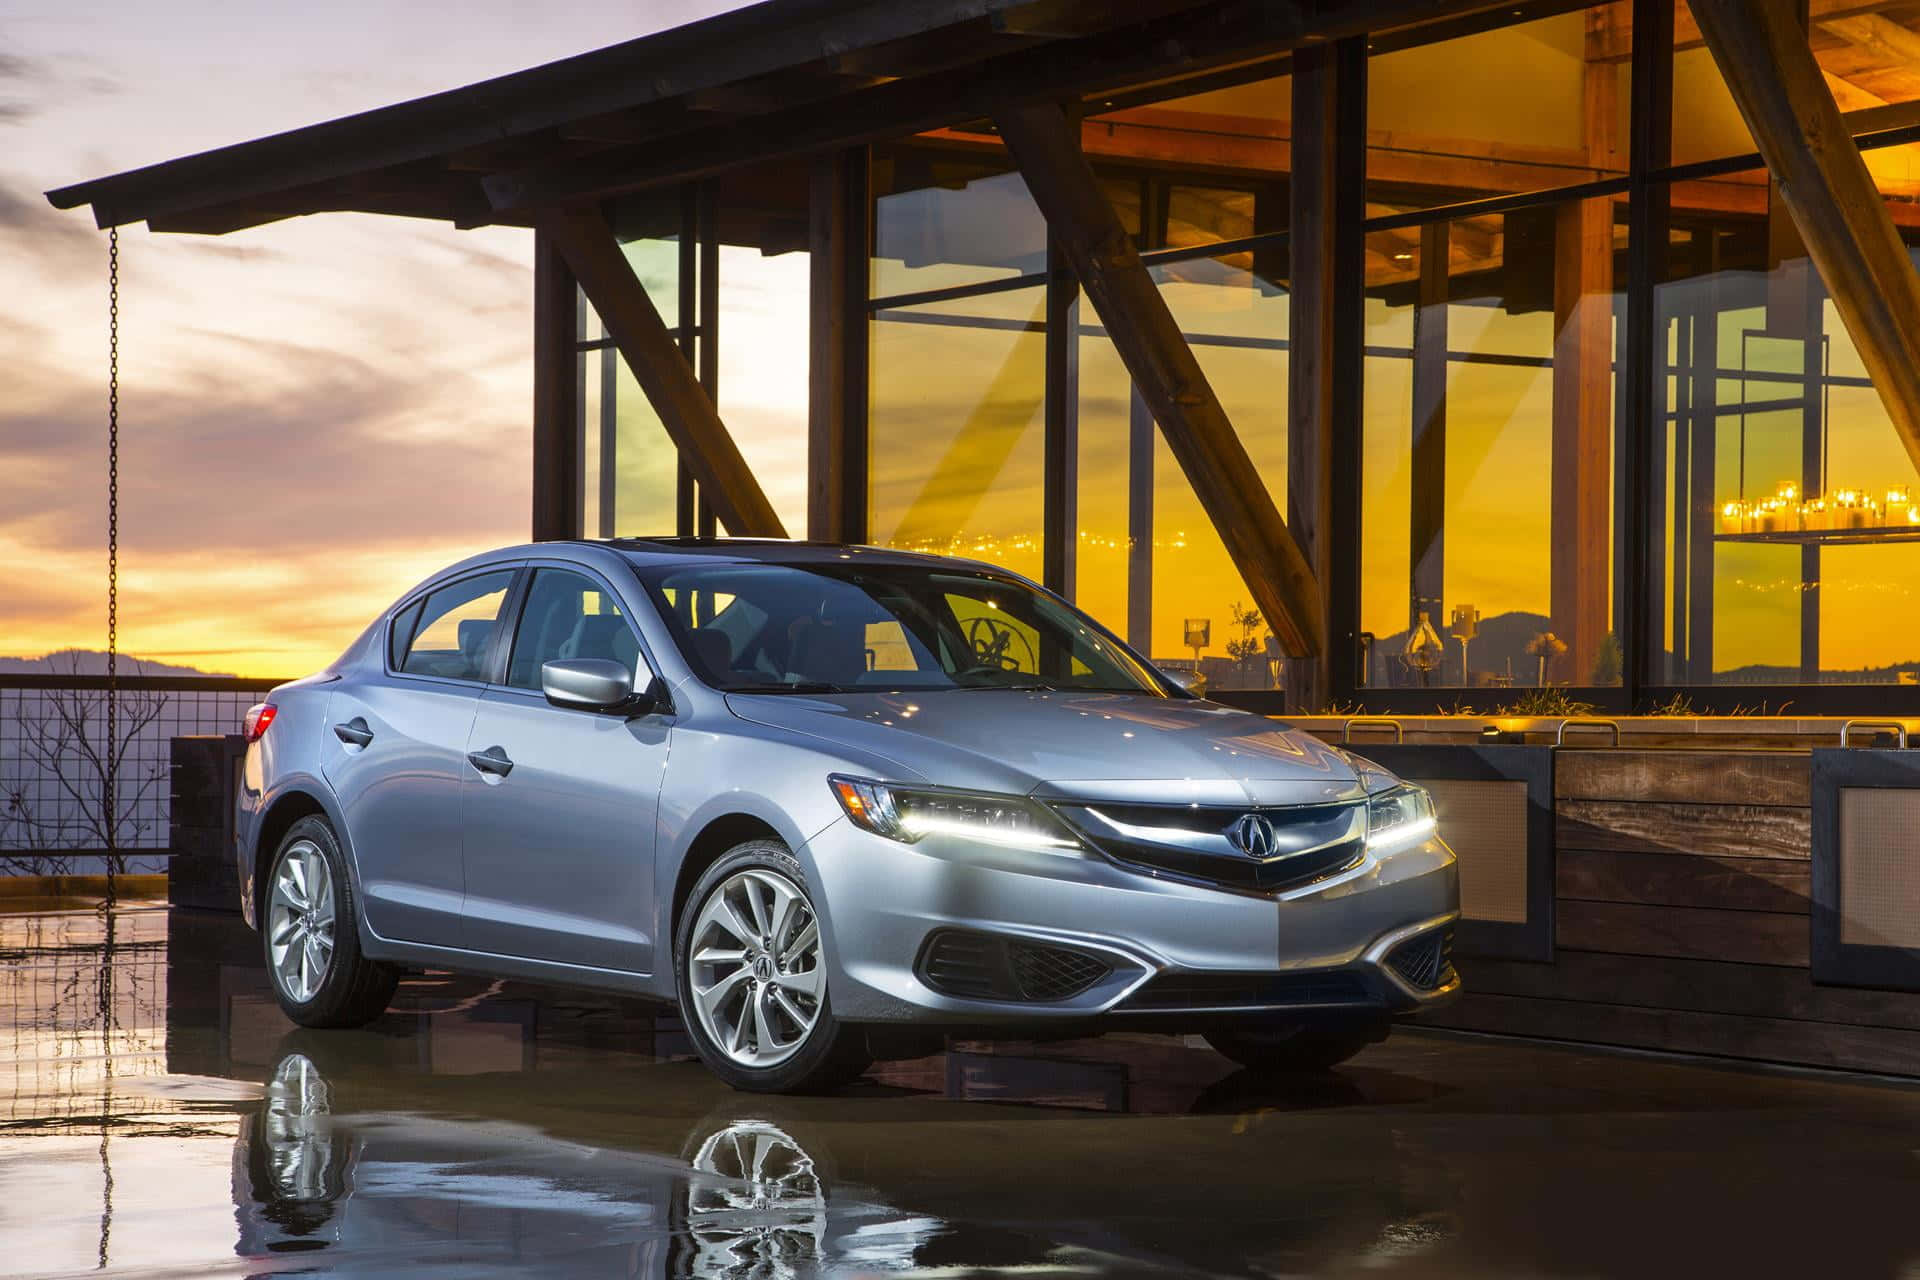 Sleek and Stylish Acura ILX with Stunning Background Wallpaper